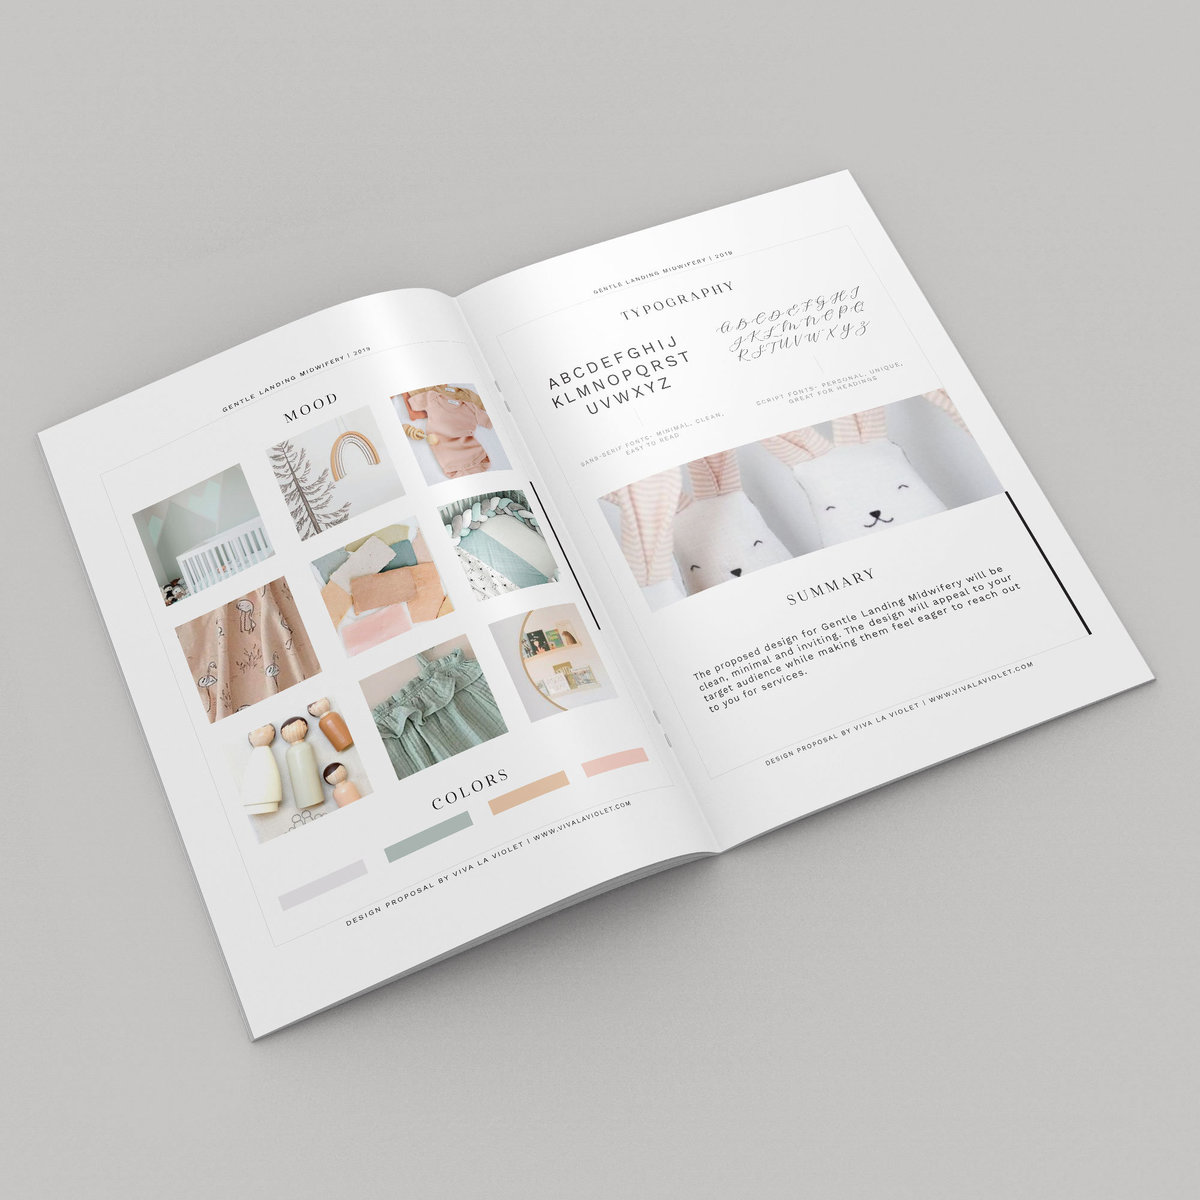 Experience the serenity of soft colors and gentle aesthetics with a brand lookbook for doulas, showcasing the soothing appeal of custom web design.